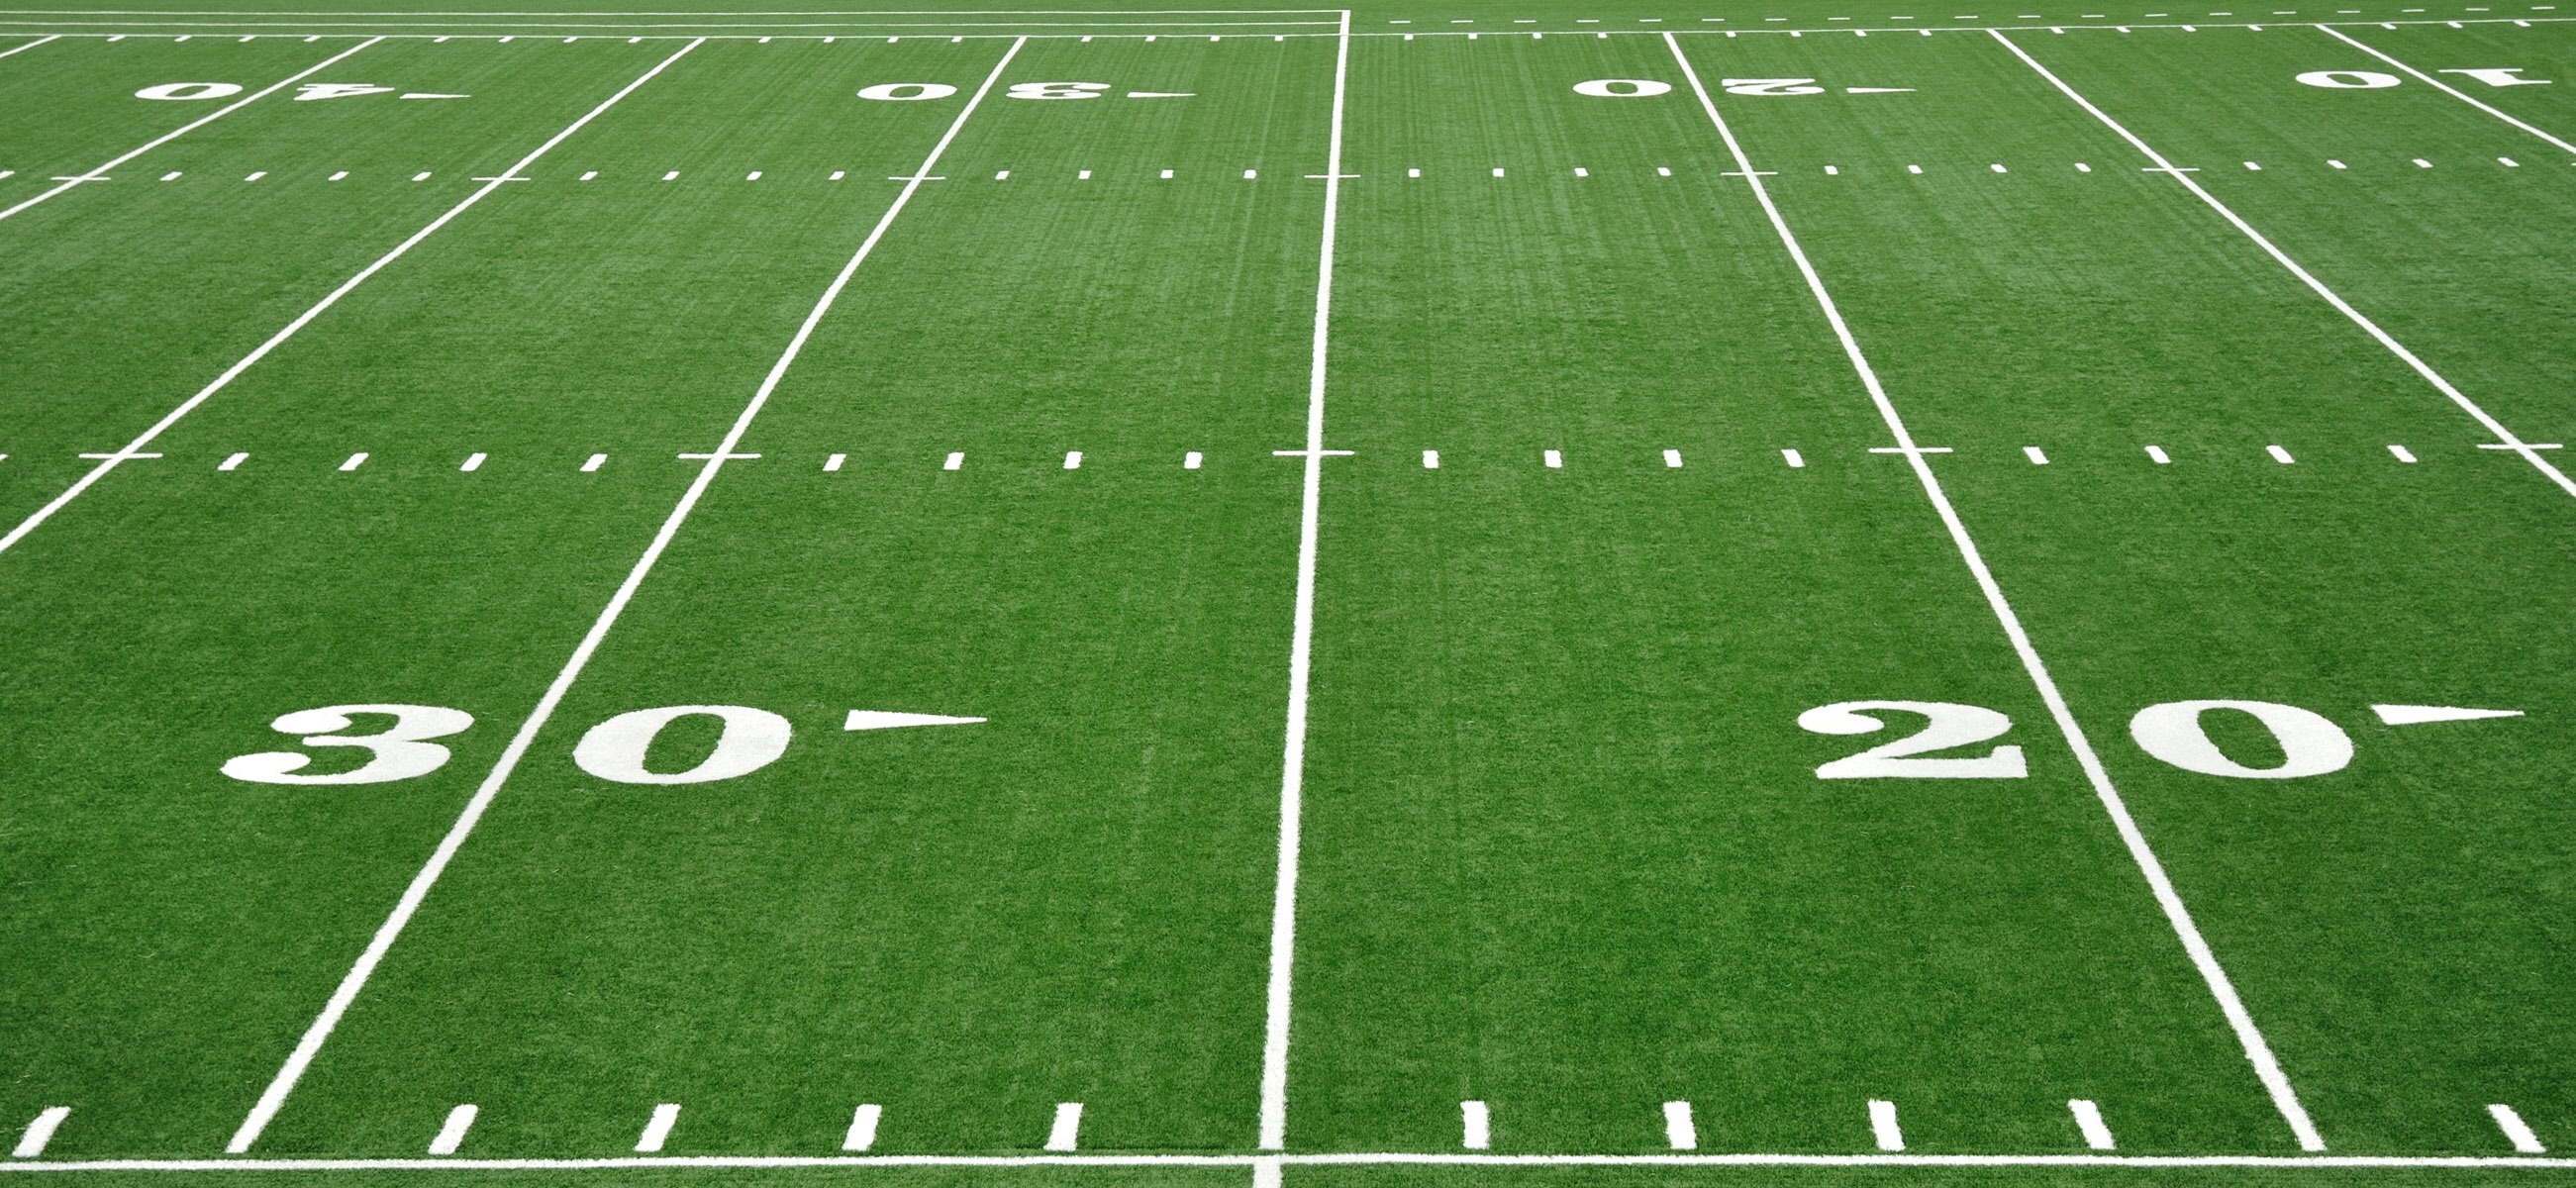 Football Field Blank Template - Imgflip With Regard To Blank Football Field Template